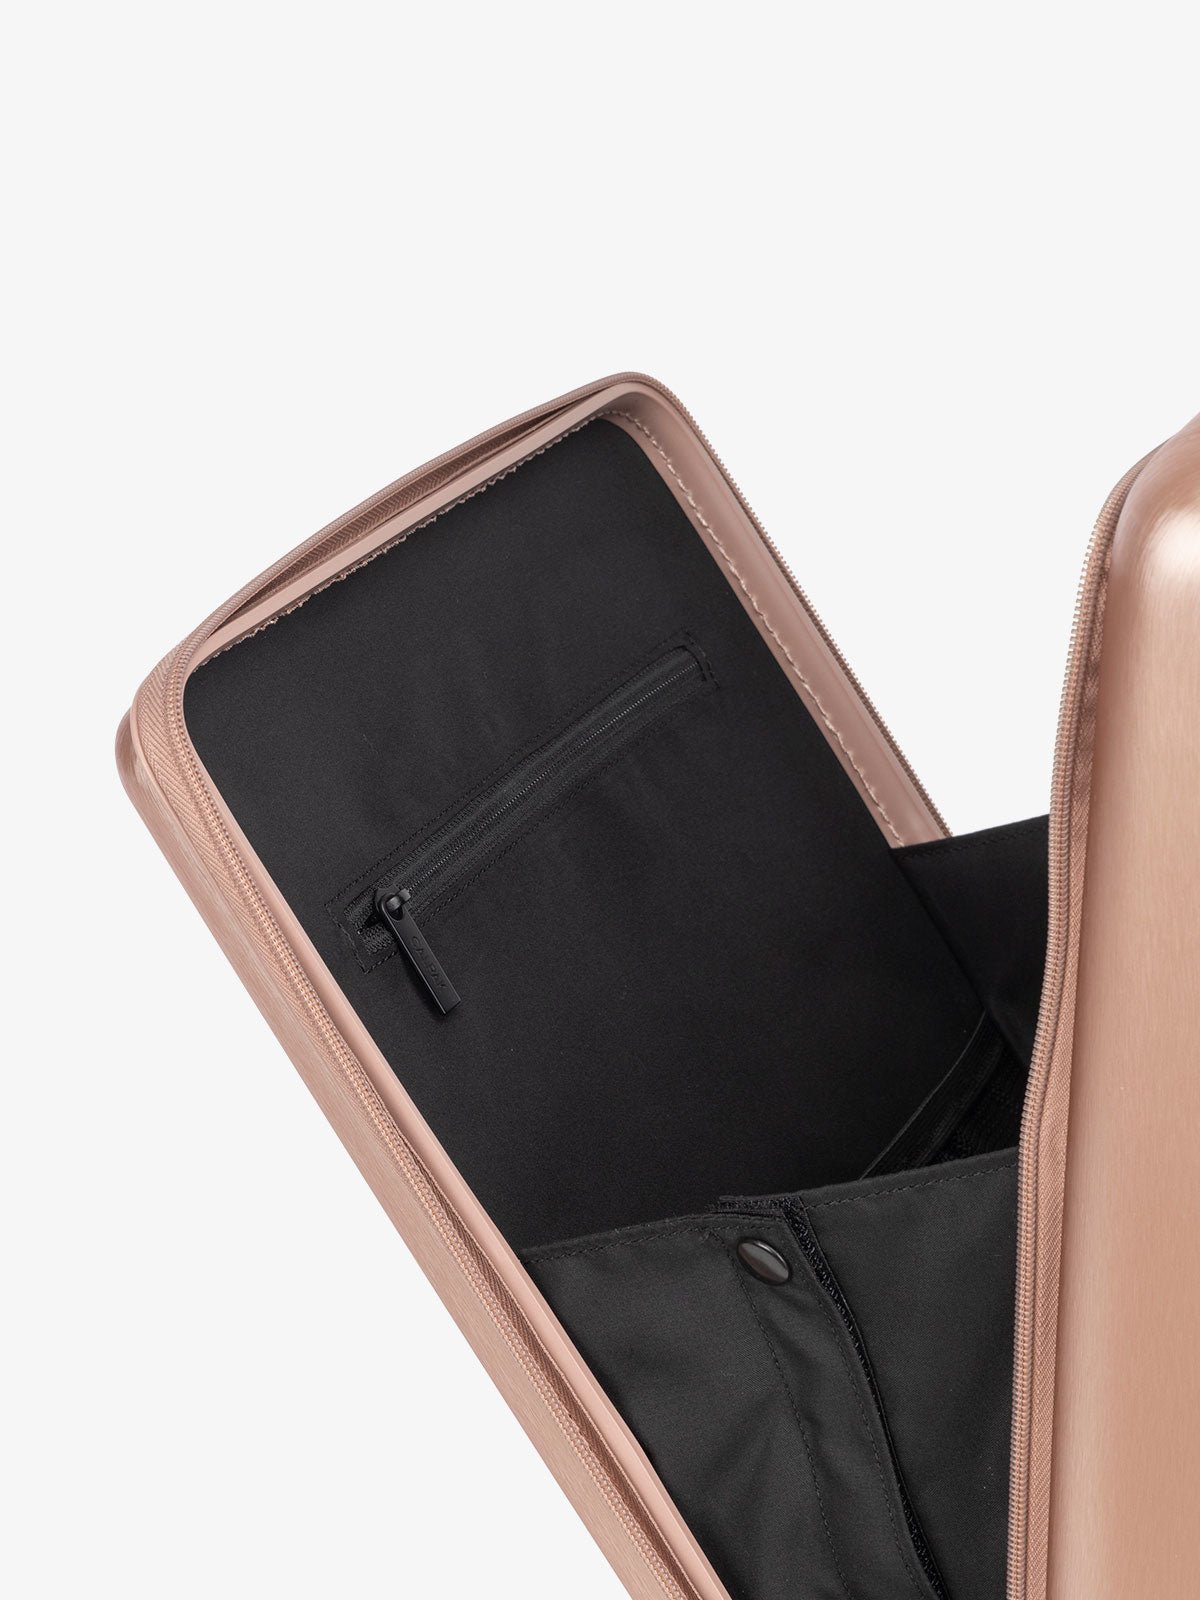 CALPAK Ambeur hard shell carry-on luggage with front pocket for laptop in rose gold